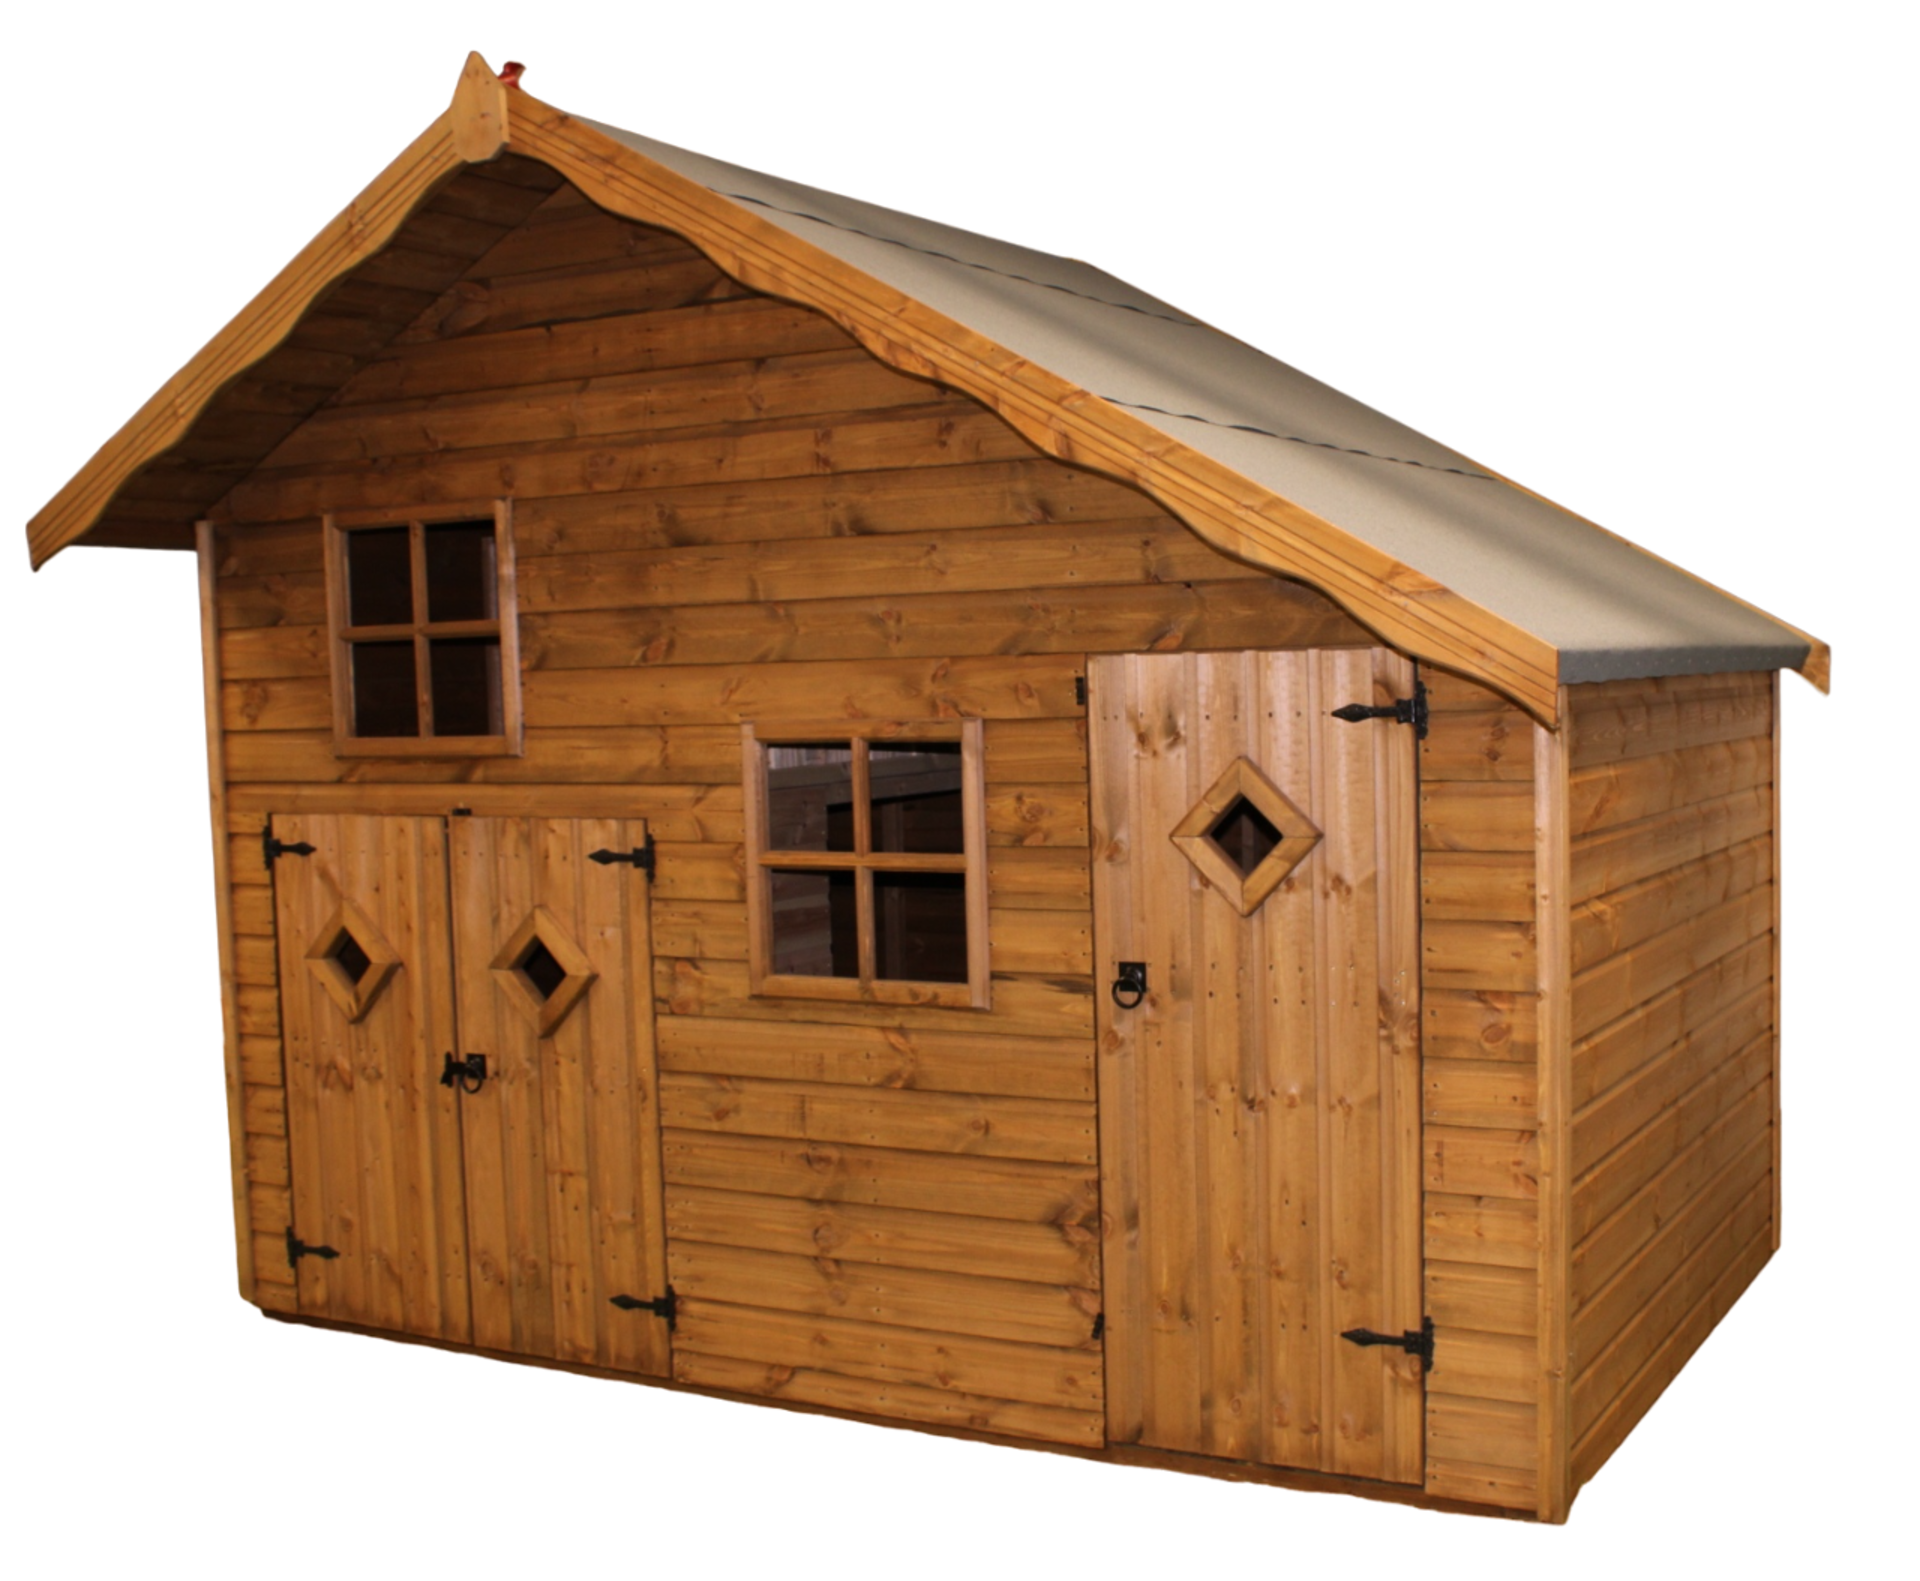 16 6/19 6x10 BRAND NEW kids playhouse shed, Standard 16mm Nominal Cladding £ 2,880 - Image 2 of 9